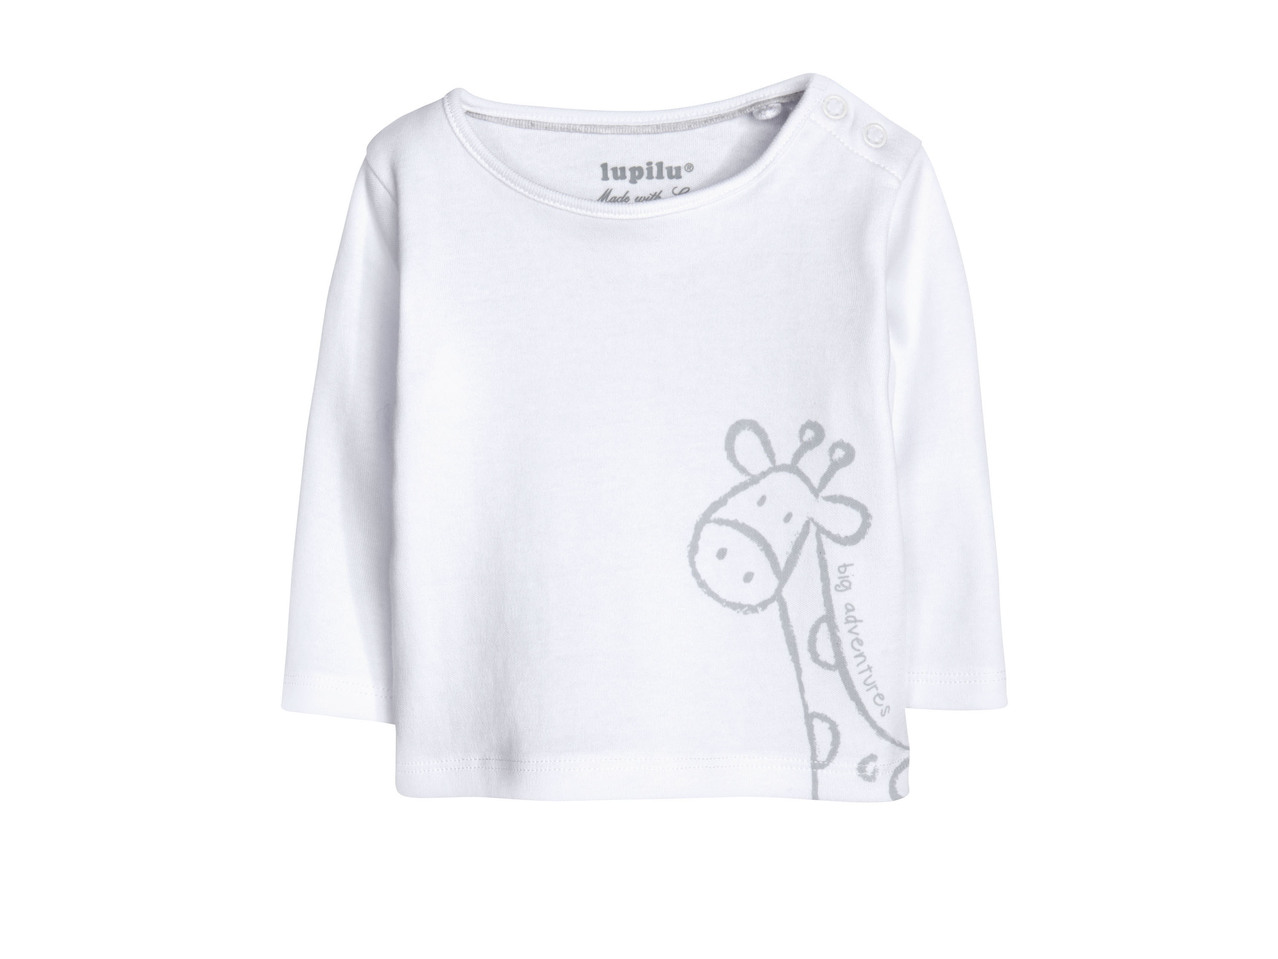 Baby Girls' Long-Sleeved Top, 3 pieces